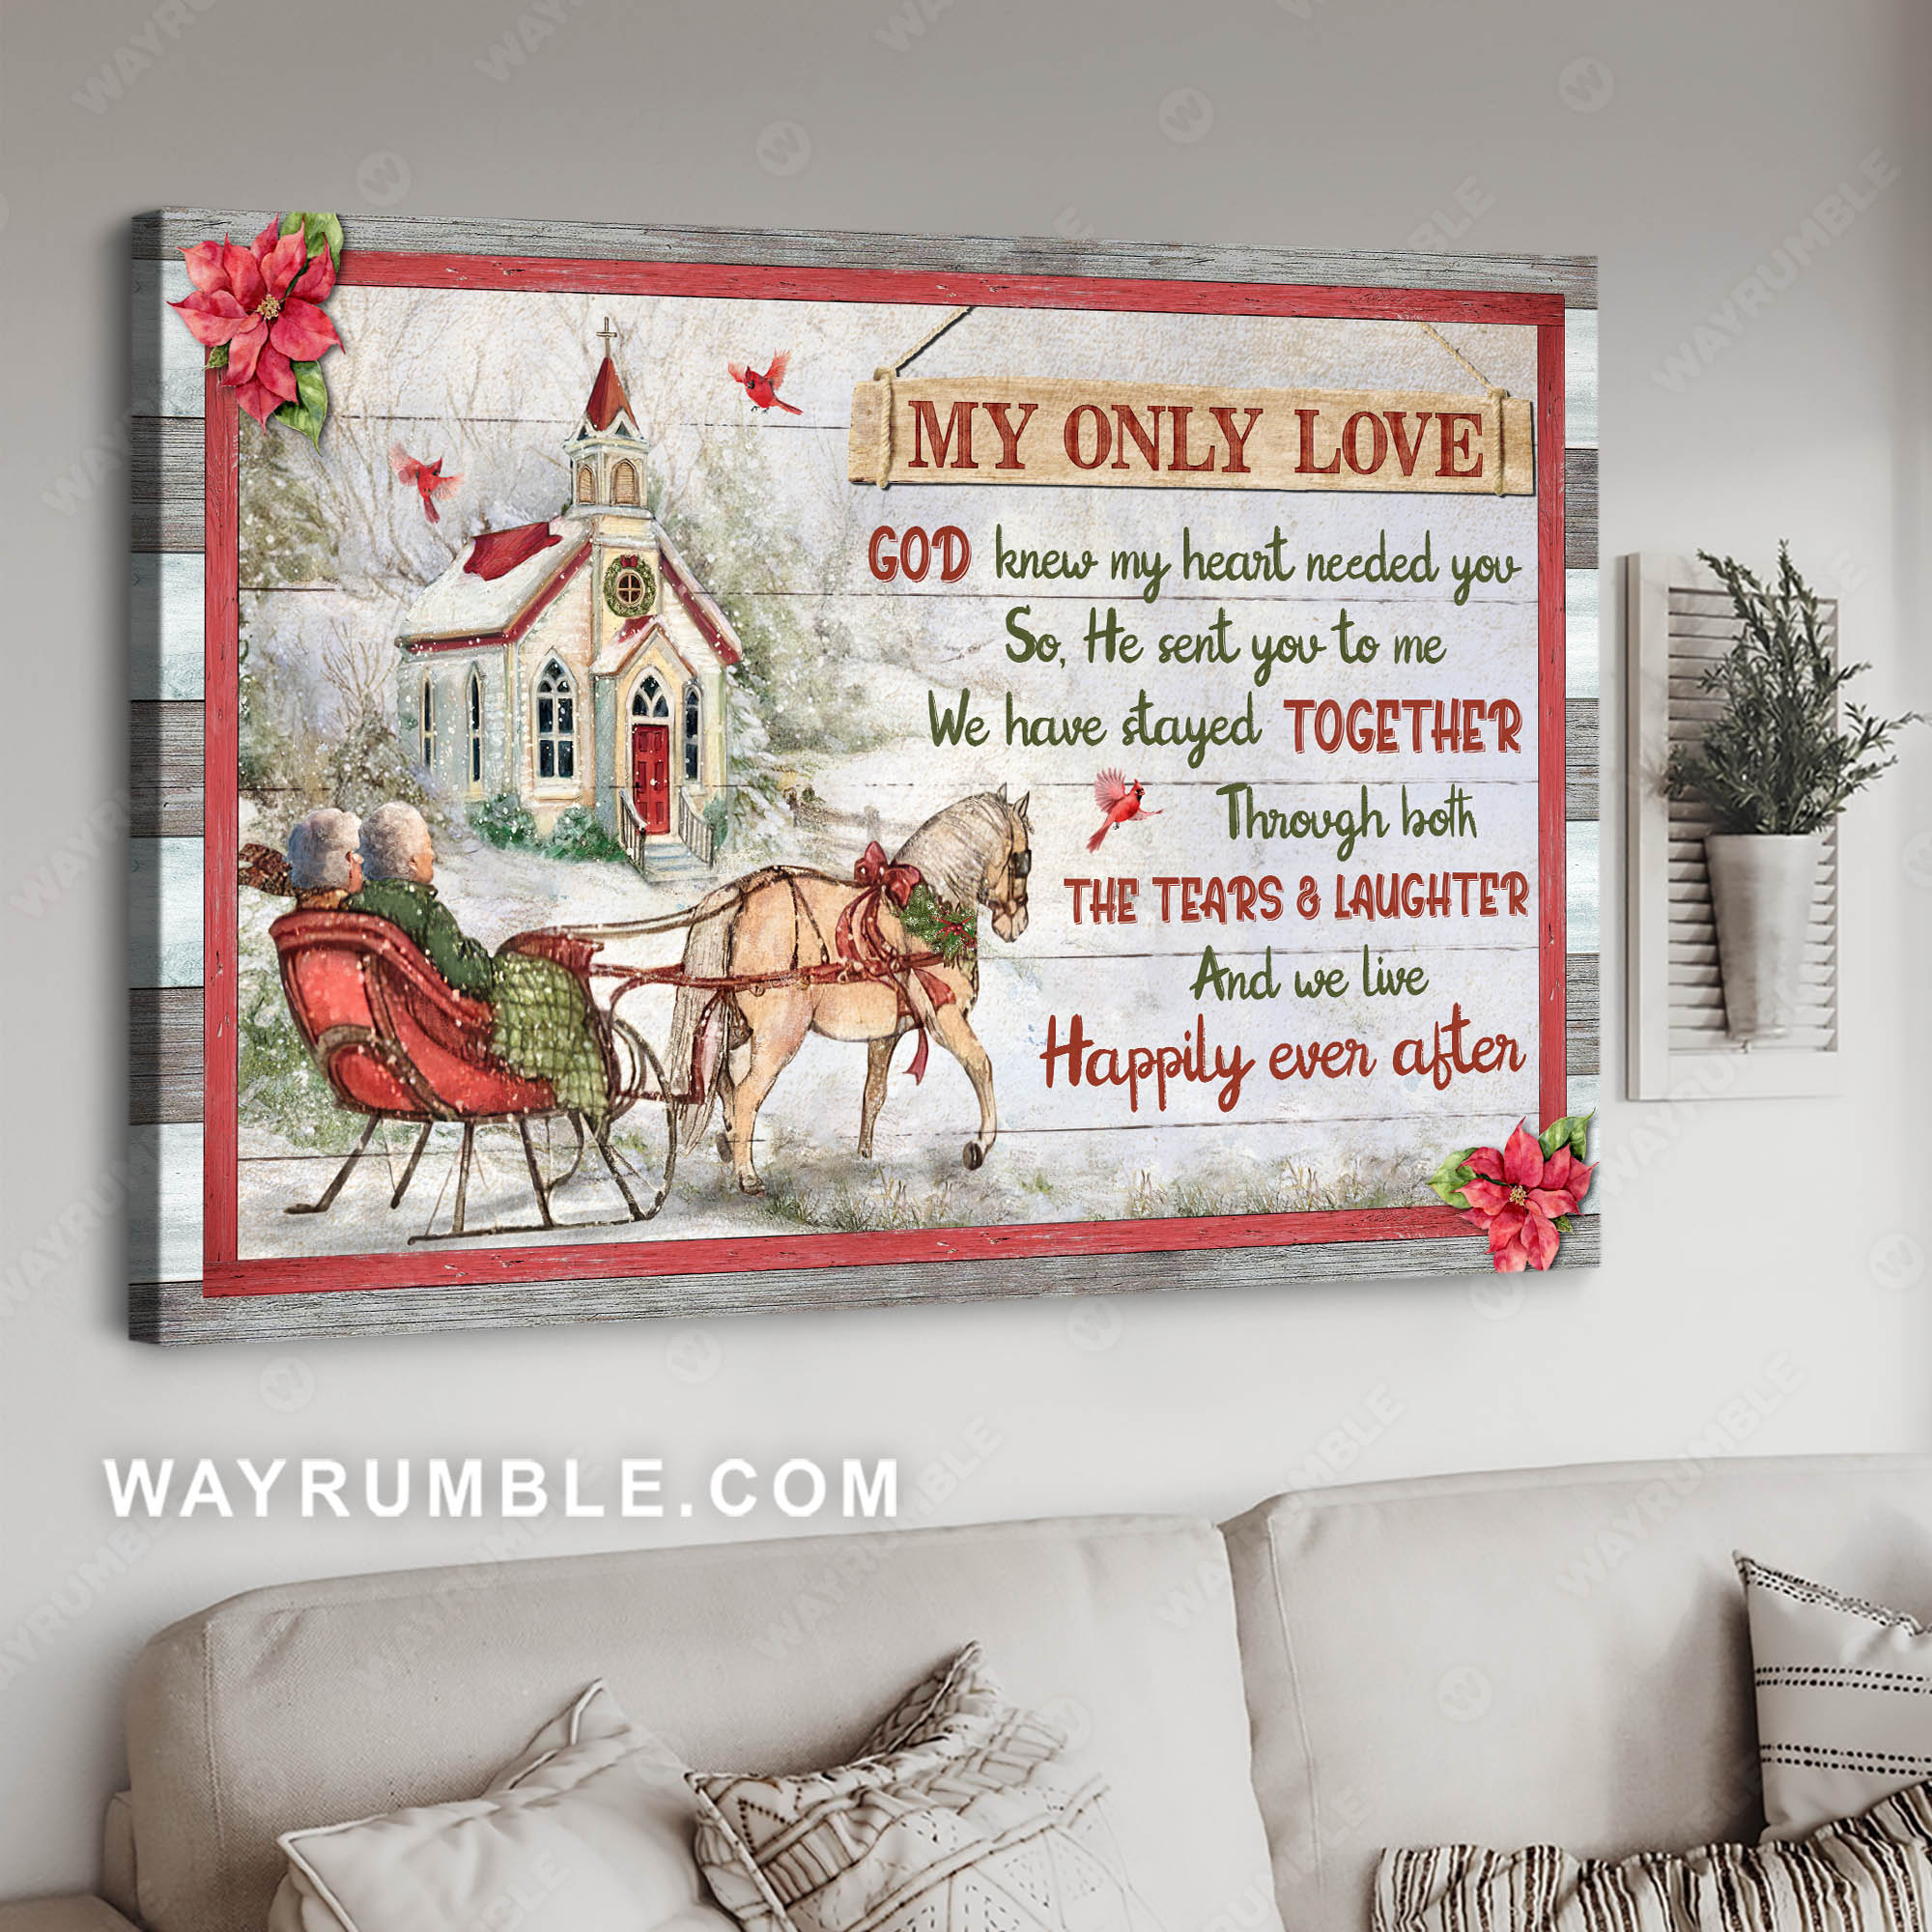 Old couple, Winter village, To the church, We live happily ever after - Couple Landscape Canvas Prints, Wall Art